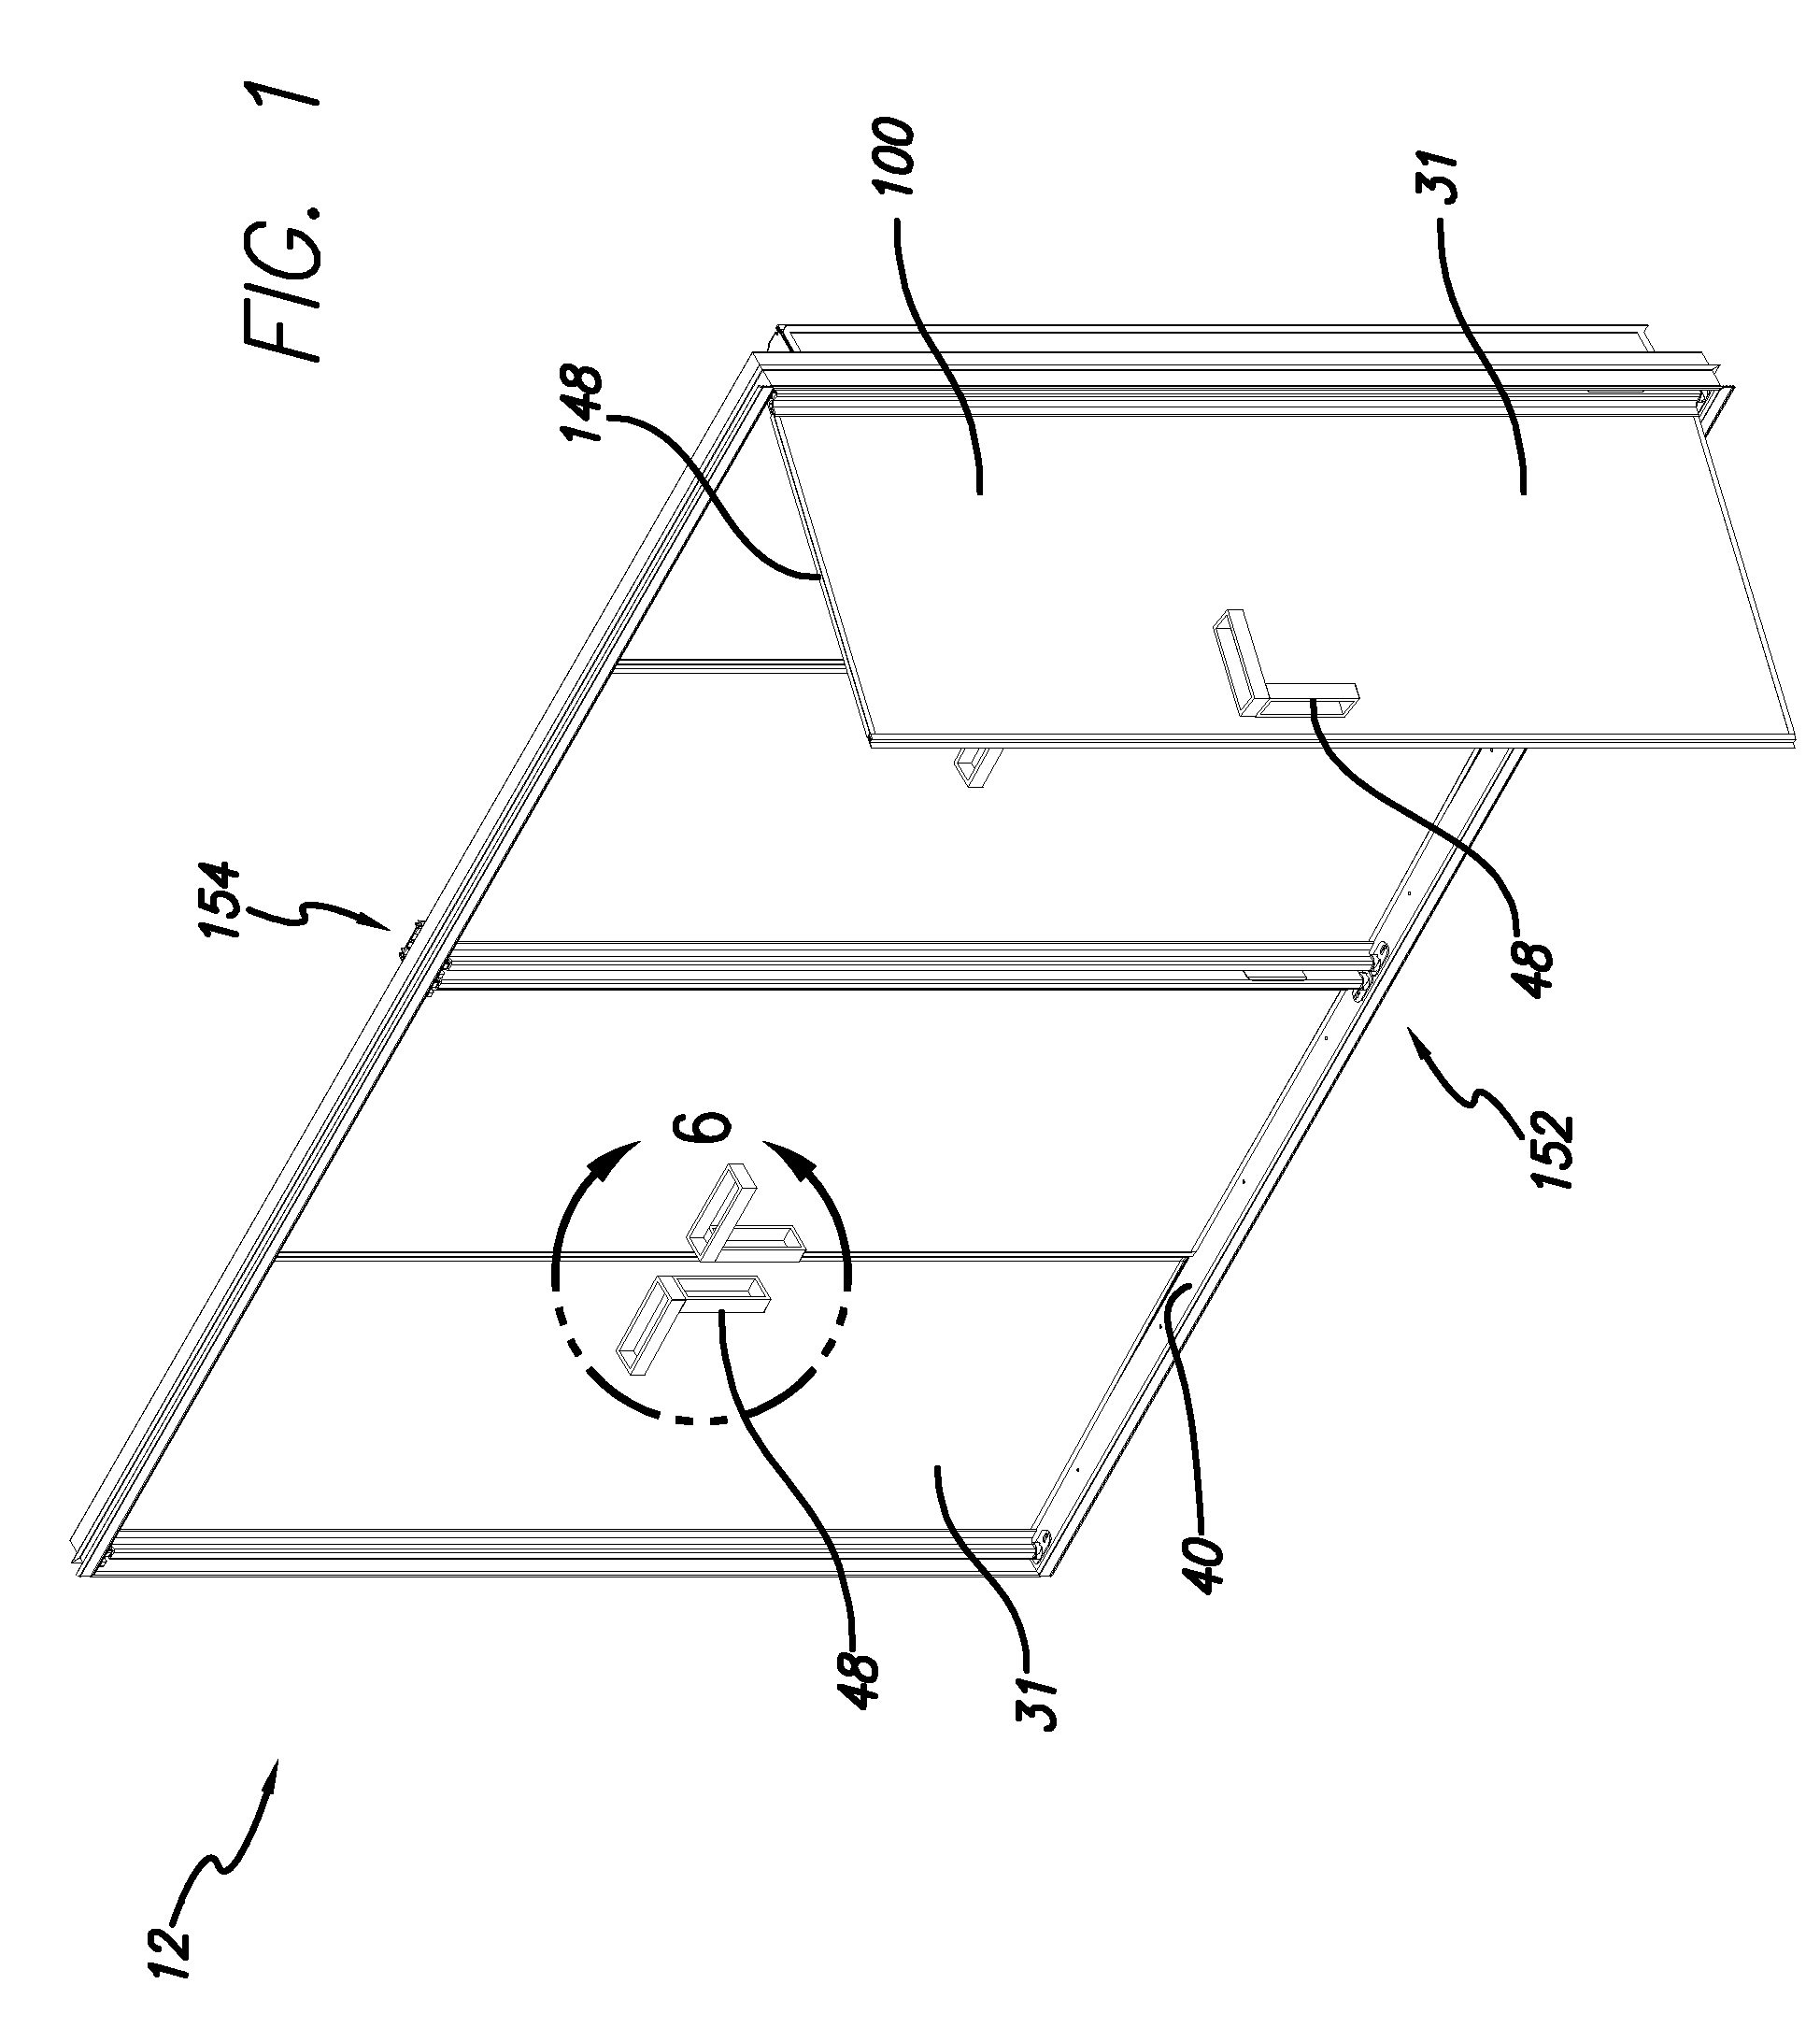 Refrigerator door construction including a laminated package